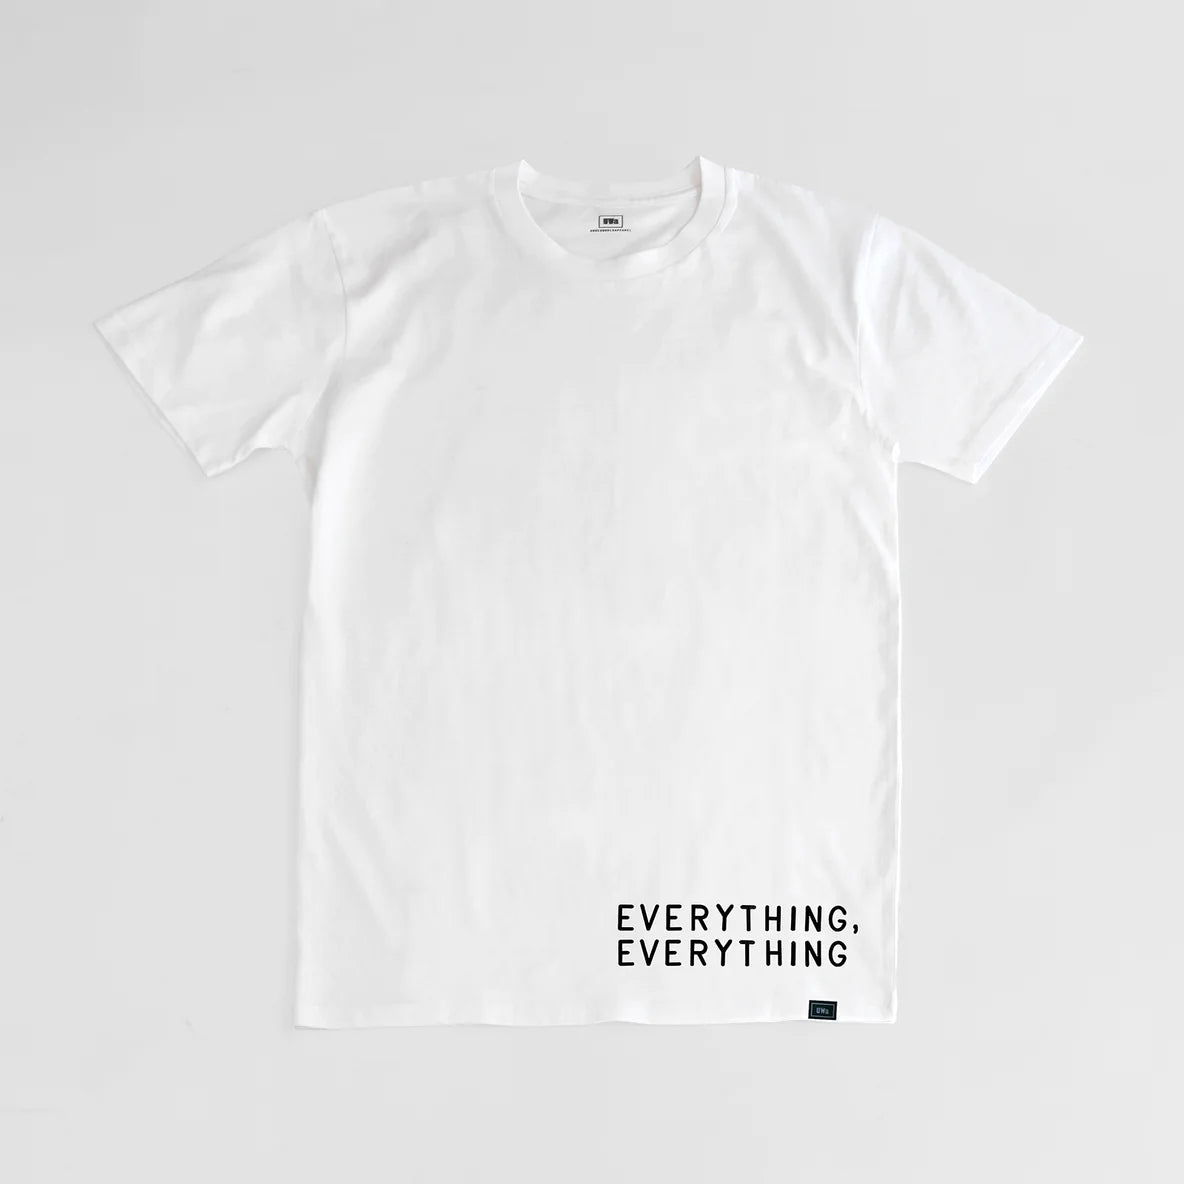 Underworld - *Cowgirl Limited Drop* Everything Everything White Tee Shirt